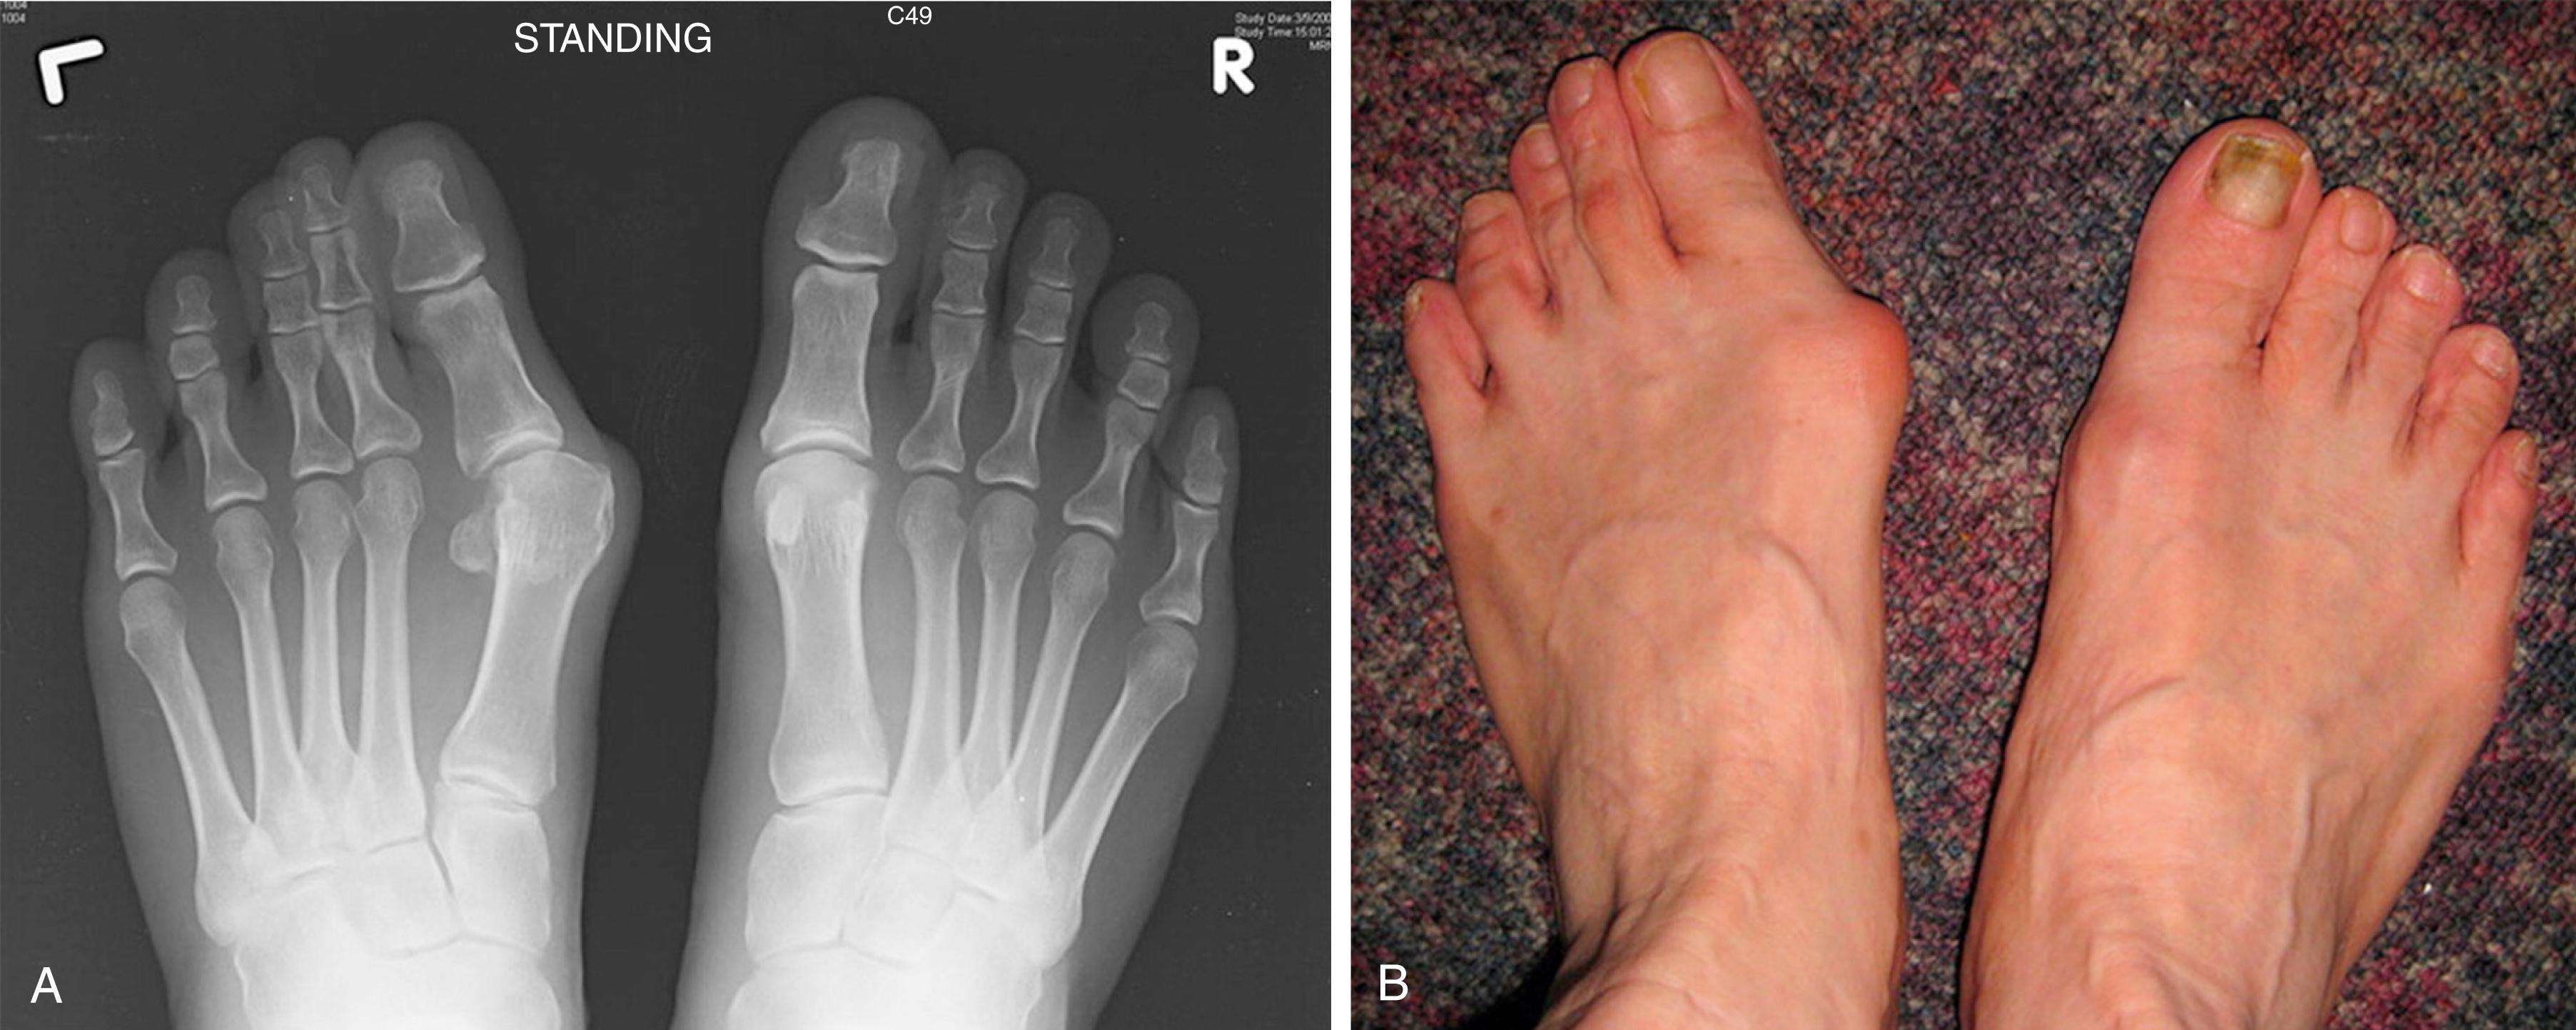 FIG. 193.3, A, Standing radiograph and (B) clinical photograph of one of the patients in the series showing left hallux valgus with inflamed adventitial bursa, left second claw toe, and bilateral bunionettes.